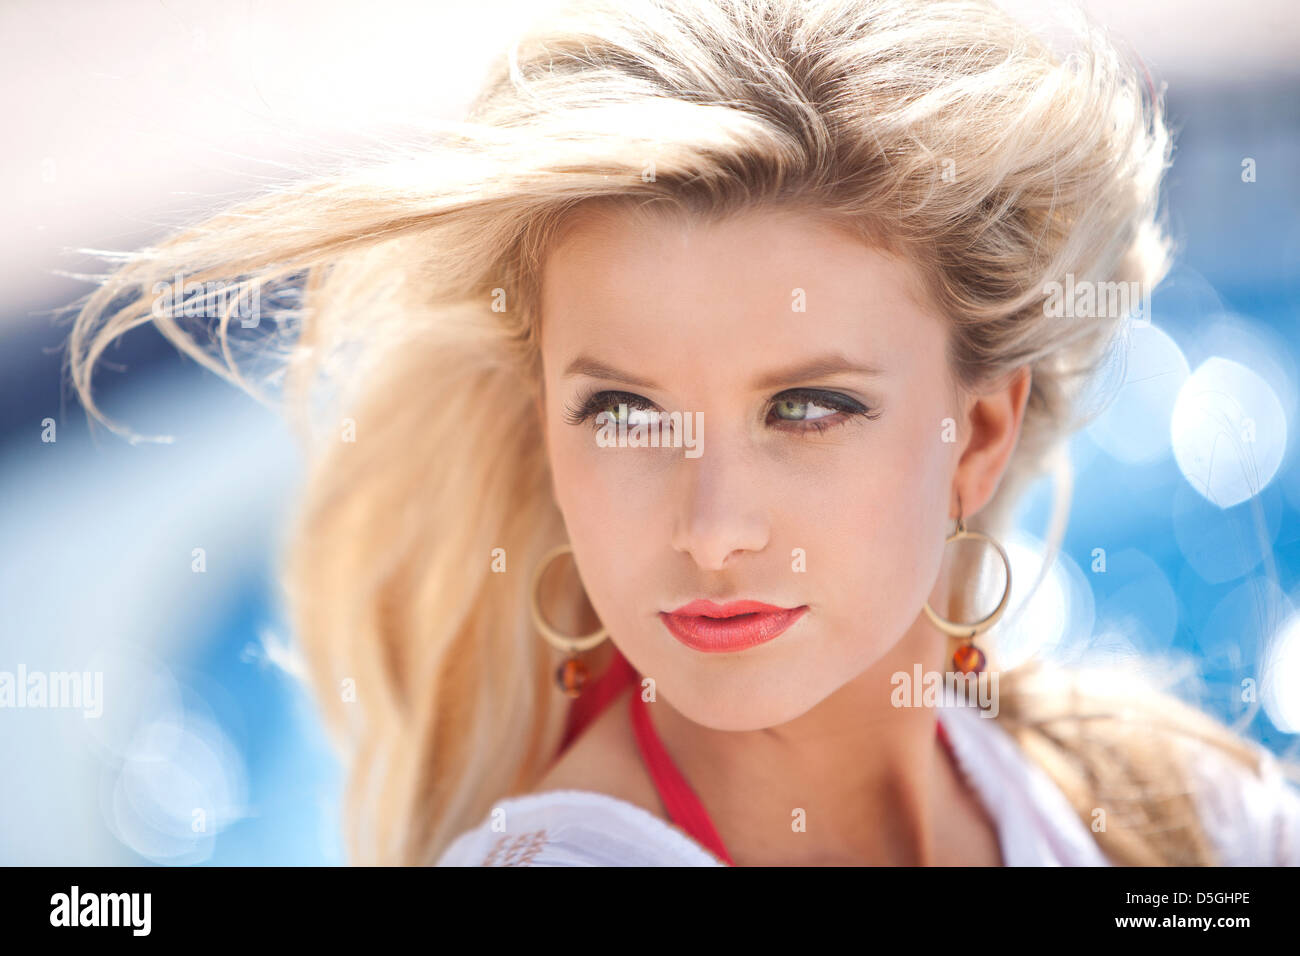 Woman with wind blown hair in front of pool Stock Photo